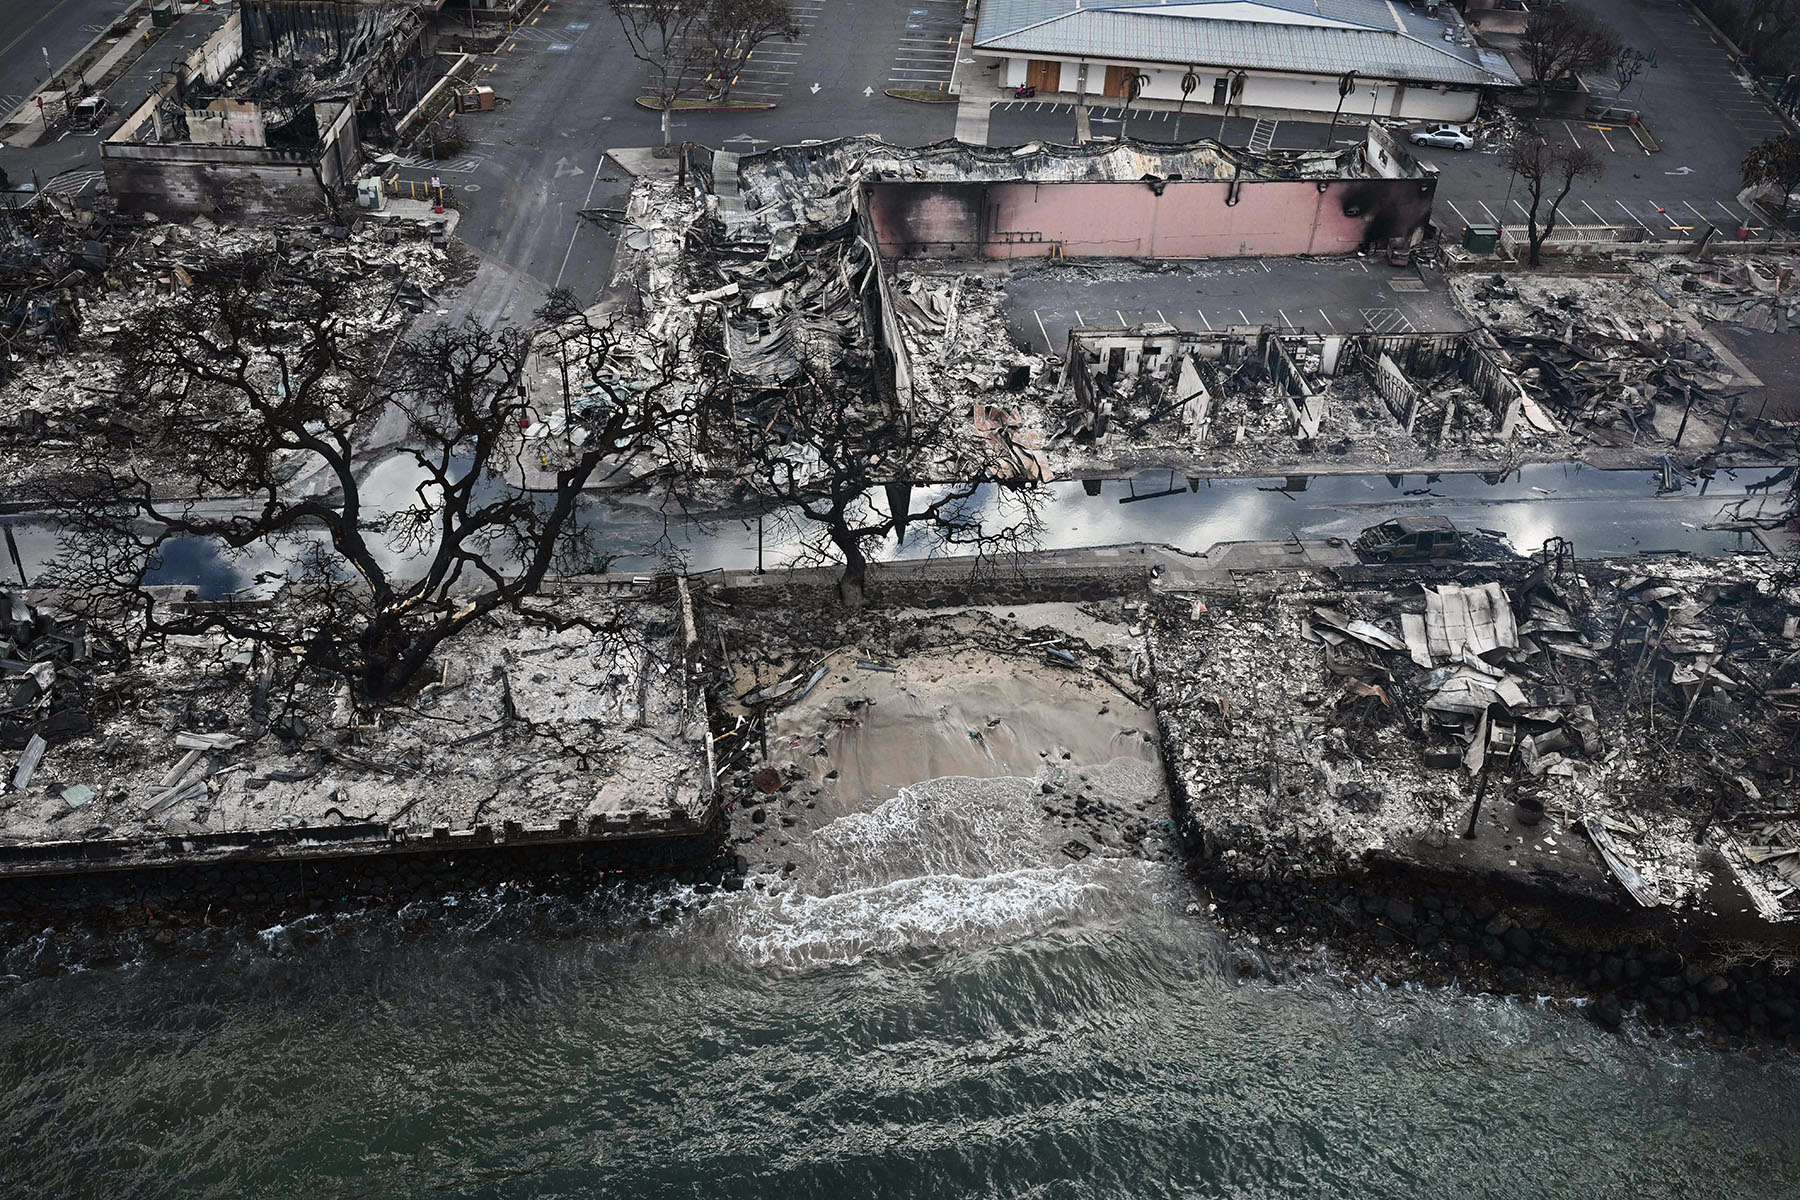 Homes and building are burned to the ground on the waterfront in Lahaina in the aftermath of wildfires.